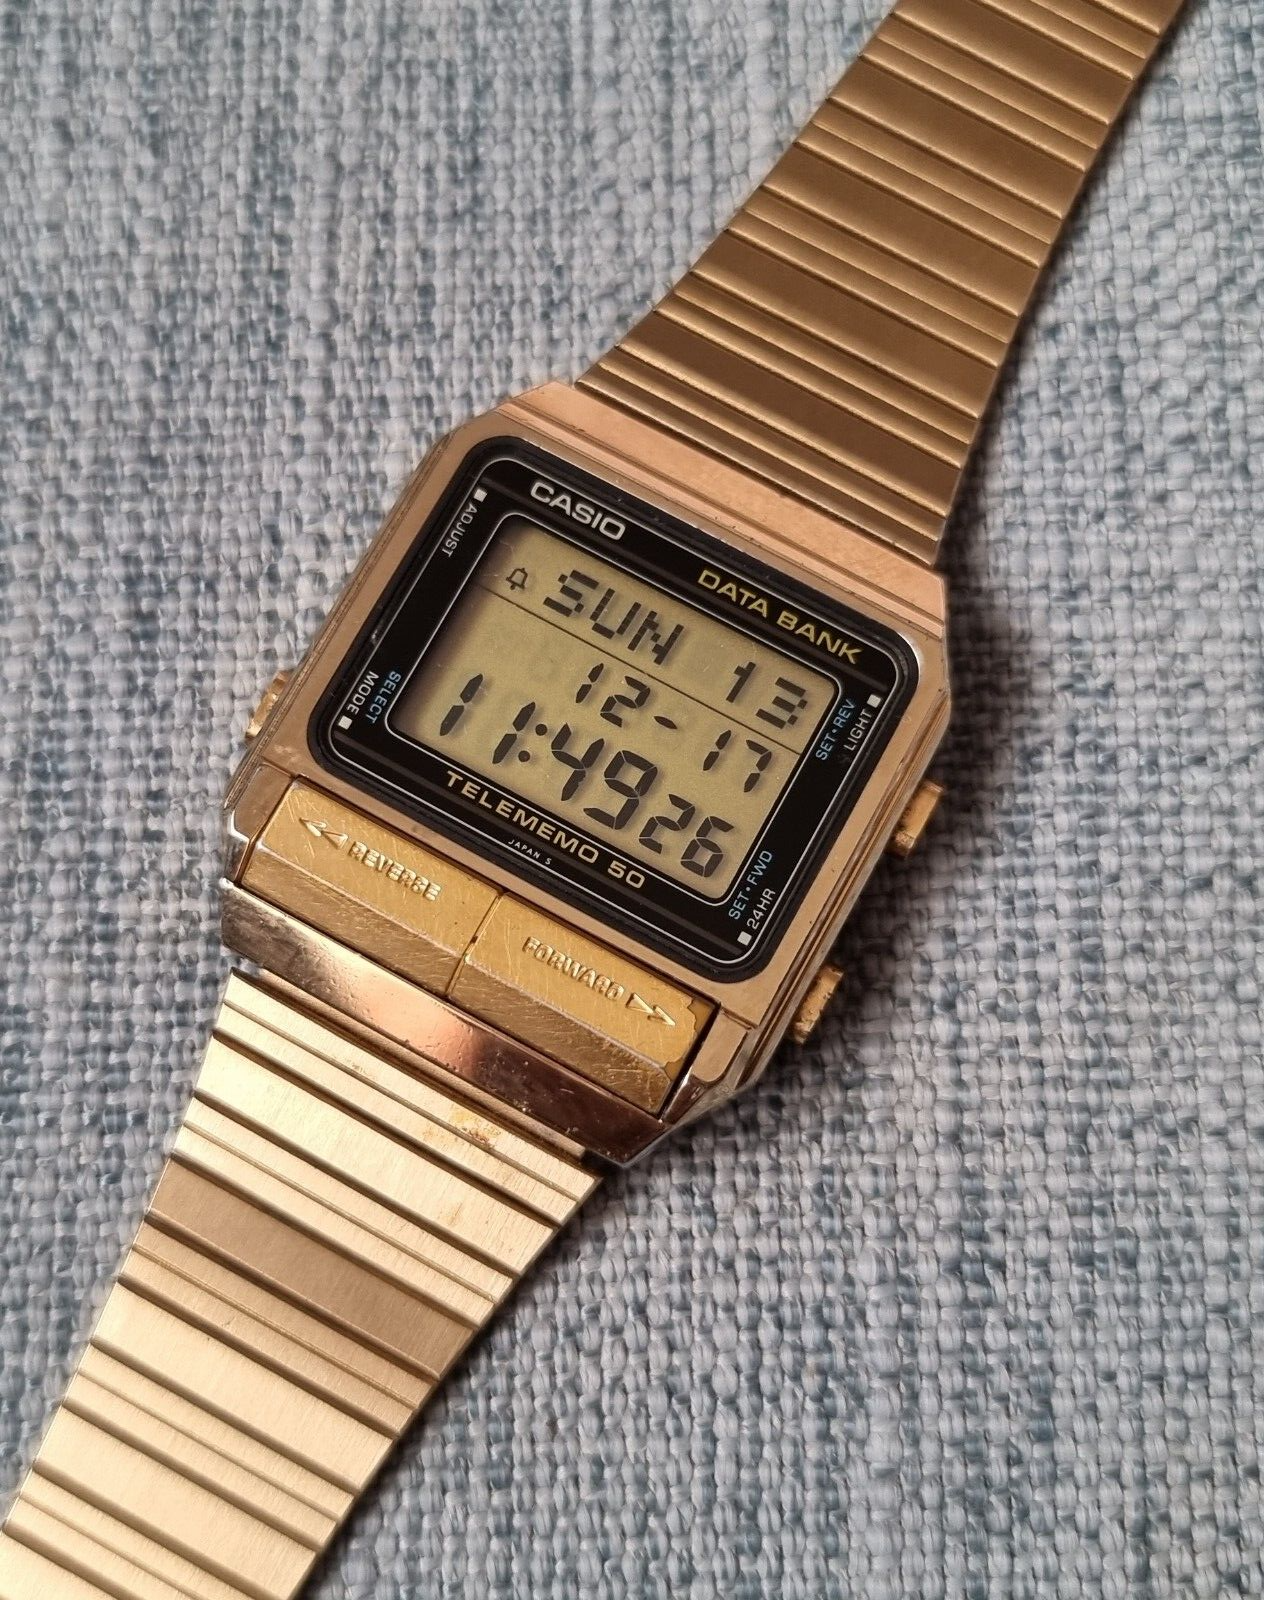 vintage casio db-500g gold color databank alarm chrono lcd watch